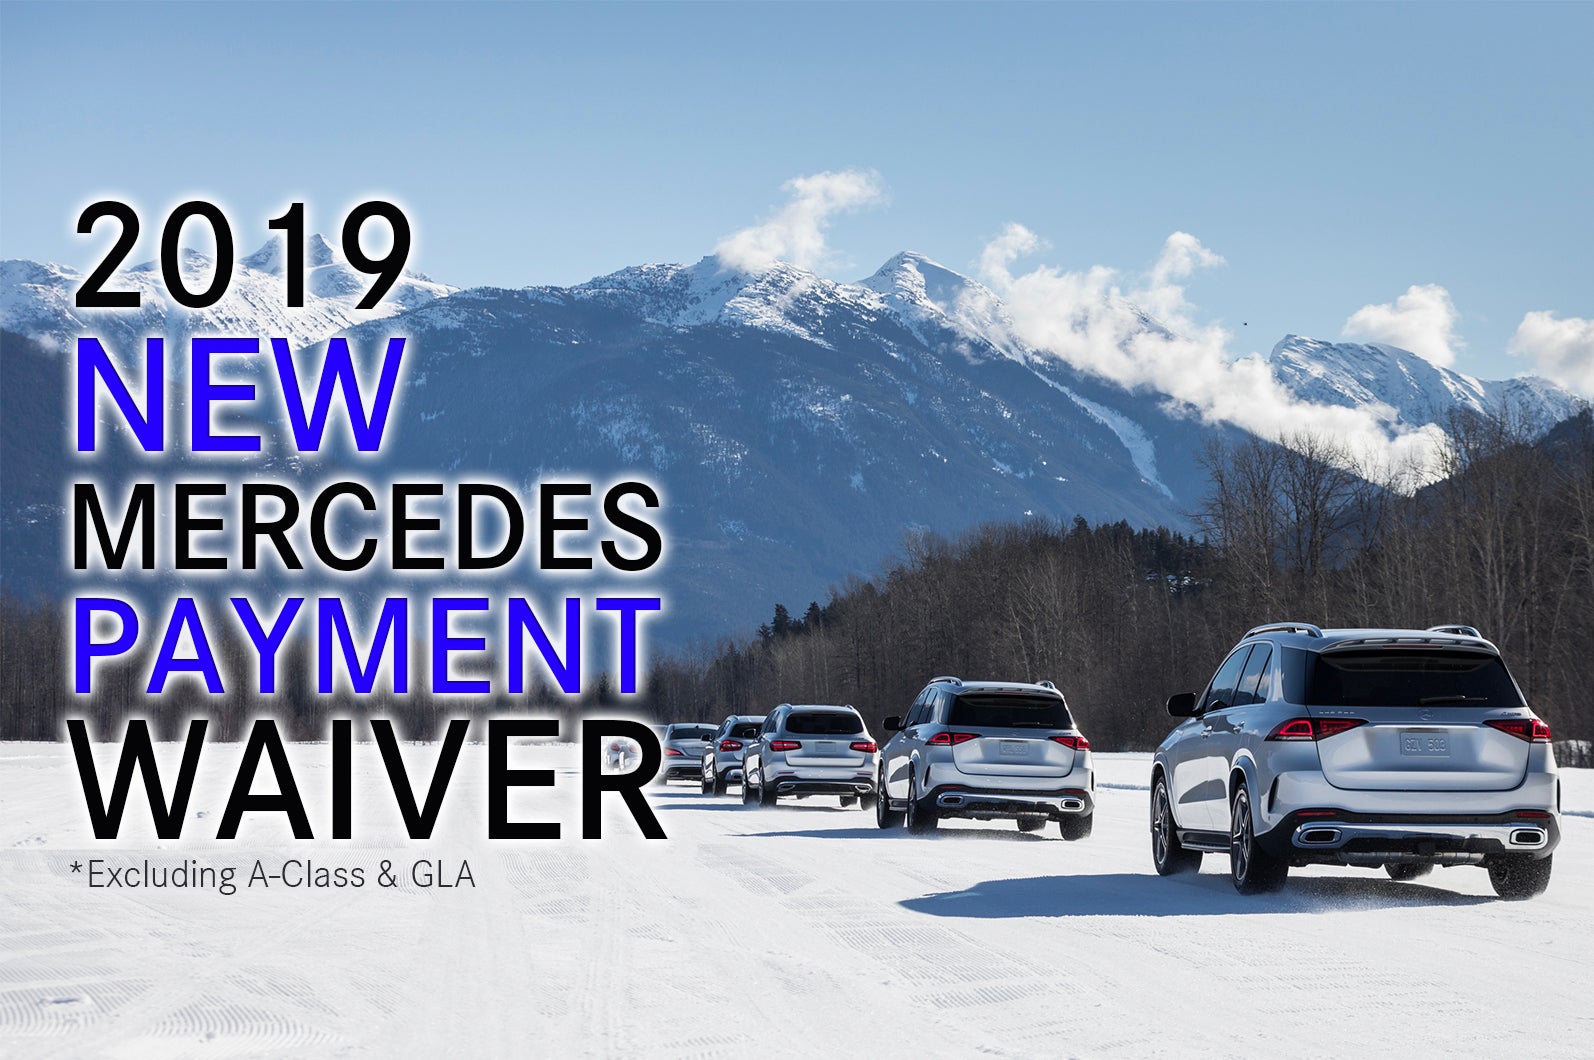 2019 New Mercedes-Benz Payment Waiver